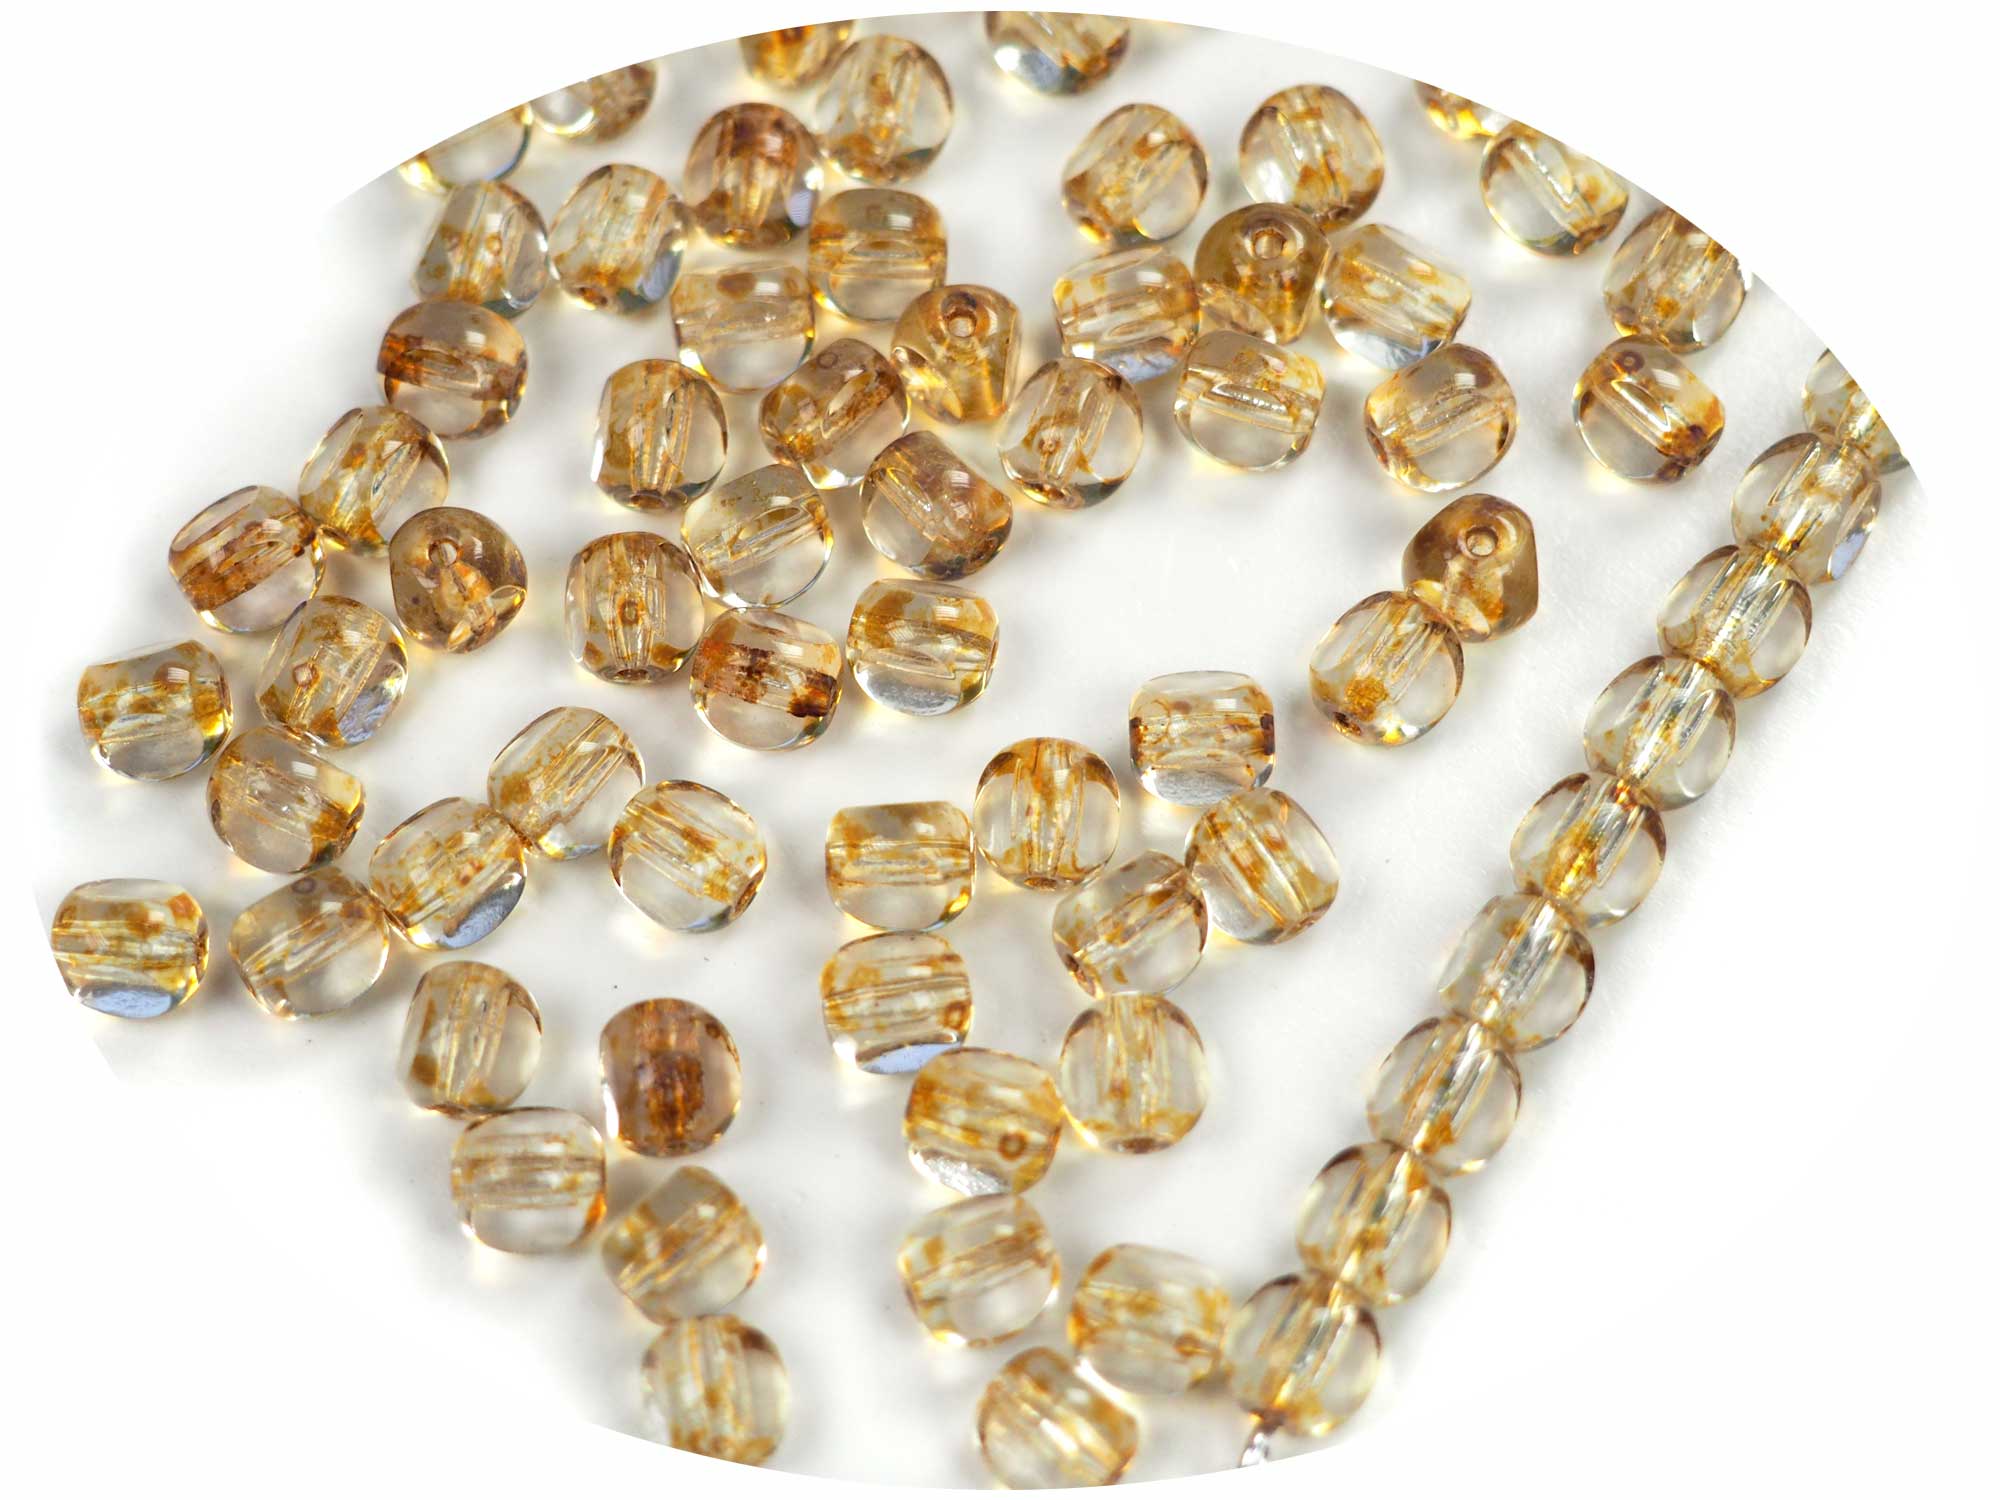 Czech Glass 3-Cut Round Window Beads (Soccer Ball Bead) Art. 151-19501 in size 6mm, Crystal Golden Picasso coating, 50pcs, P872